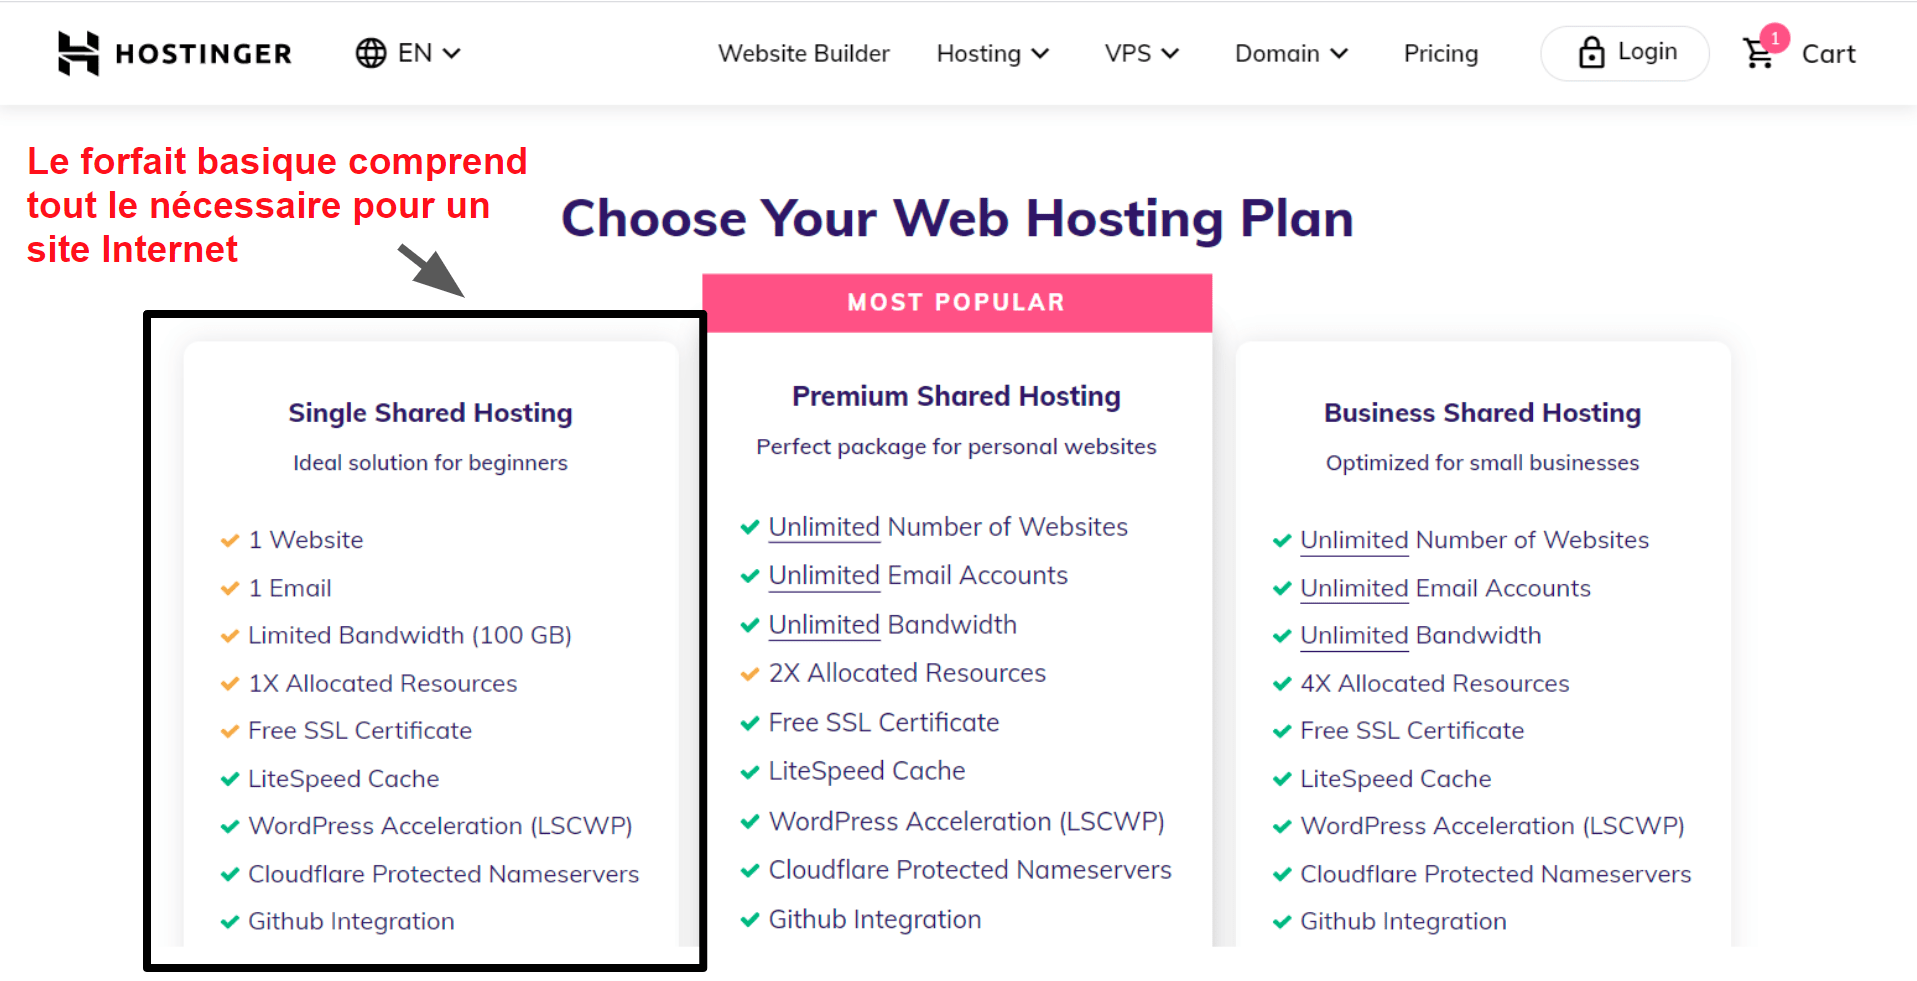 hosting plan features_FR